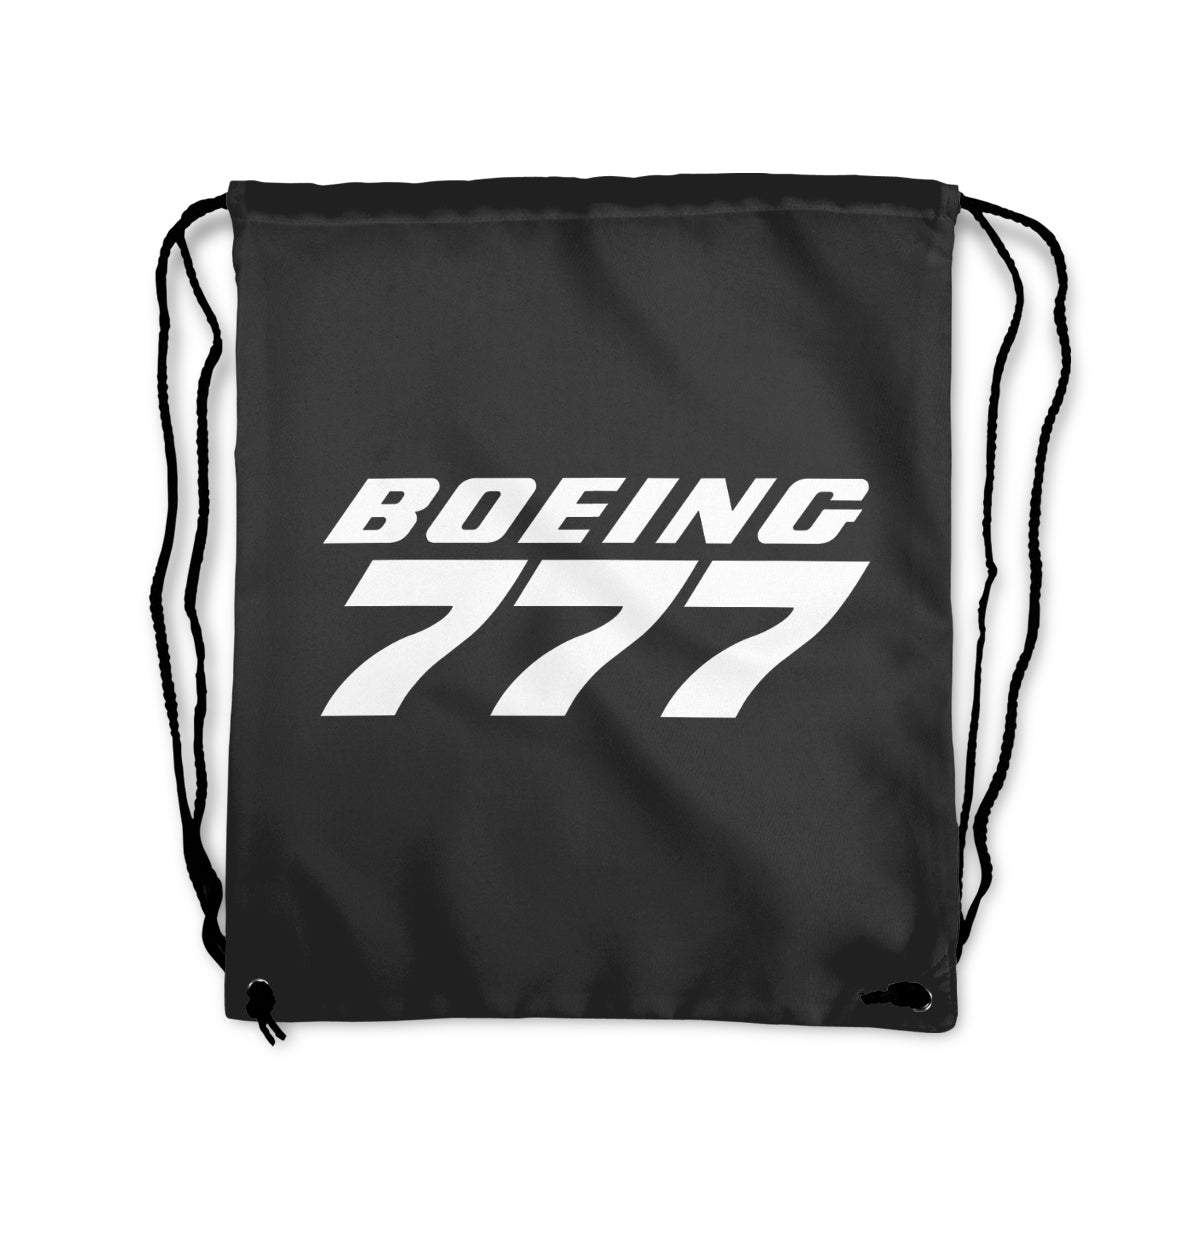 Boeing 777 & Text Designed Drawstring Bags